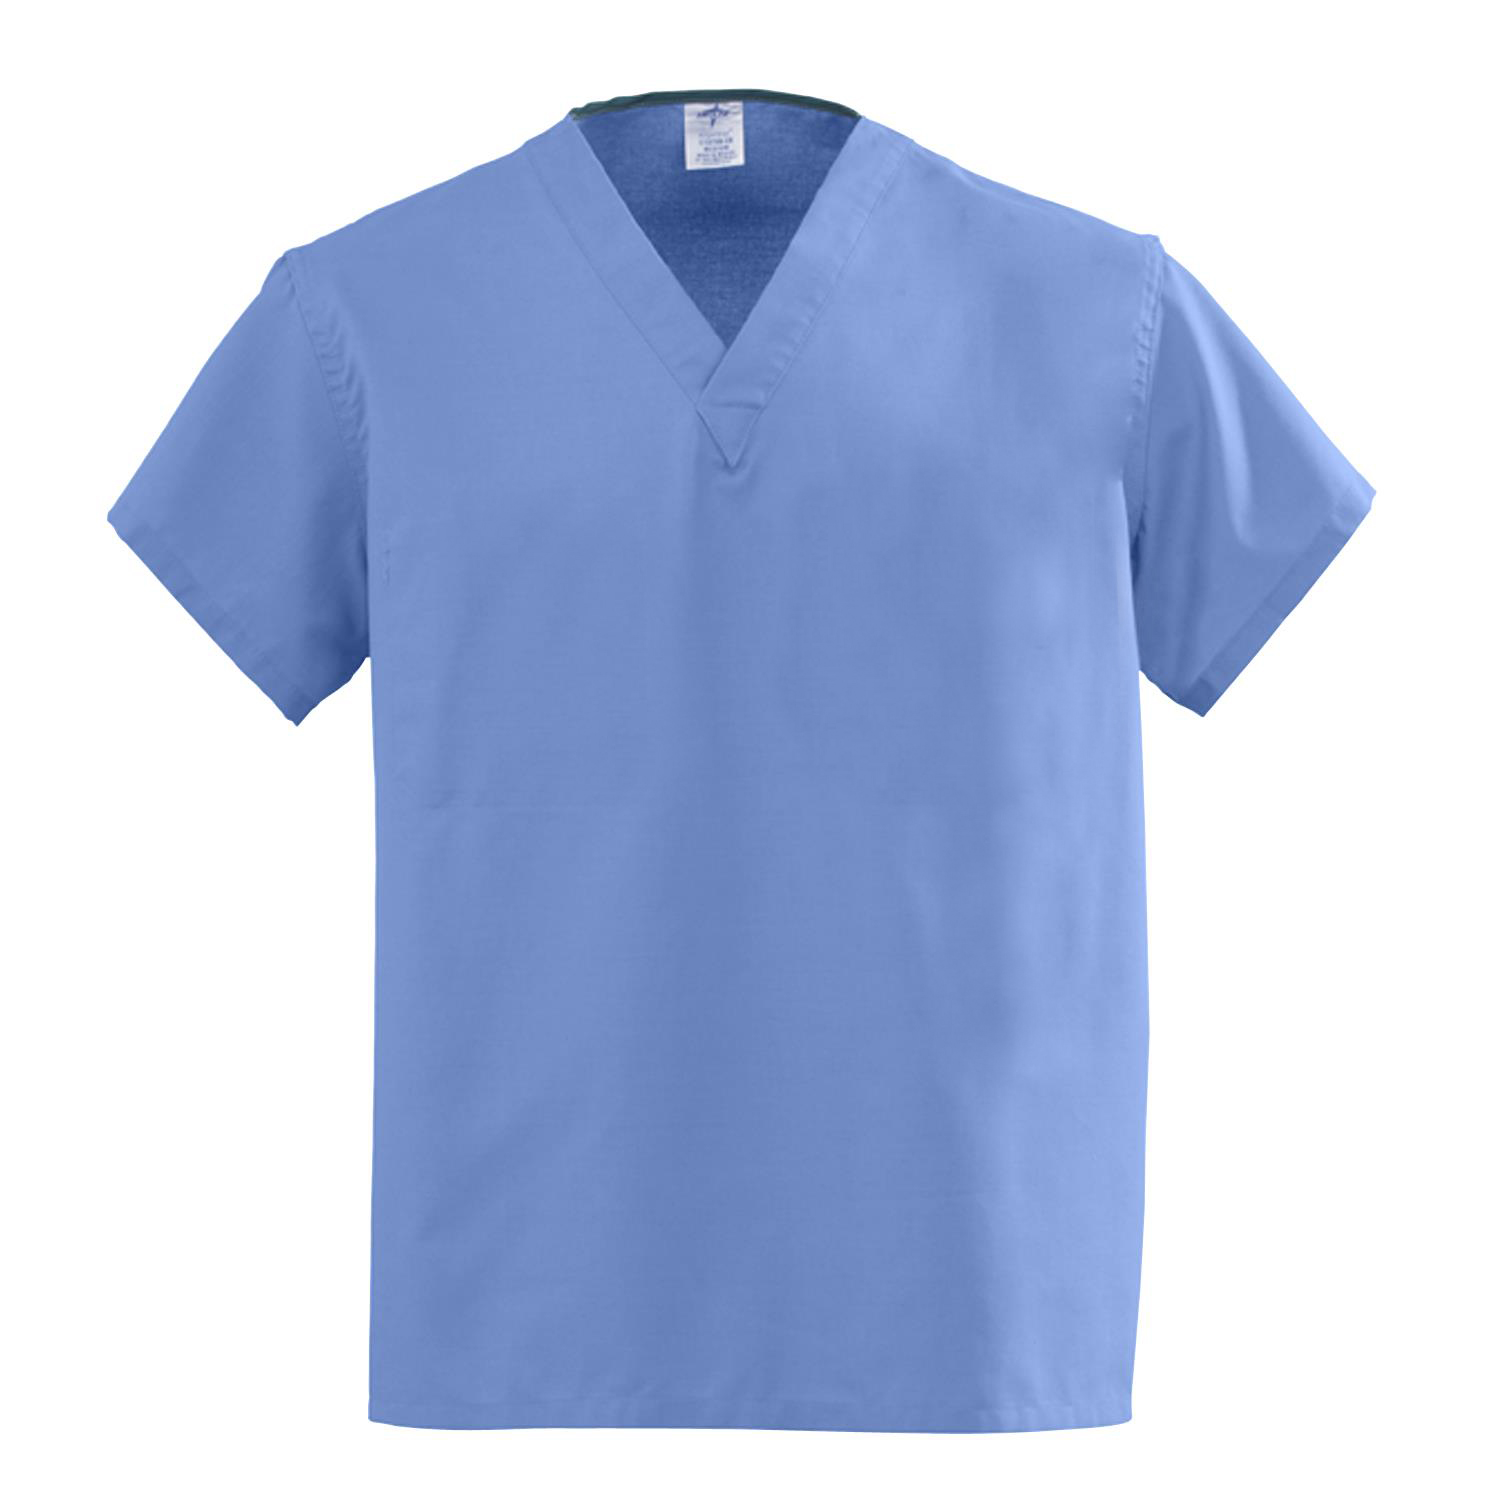 Medical Scrubs - Unisex Scrubs 55/45 | Prudential Overall Supply